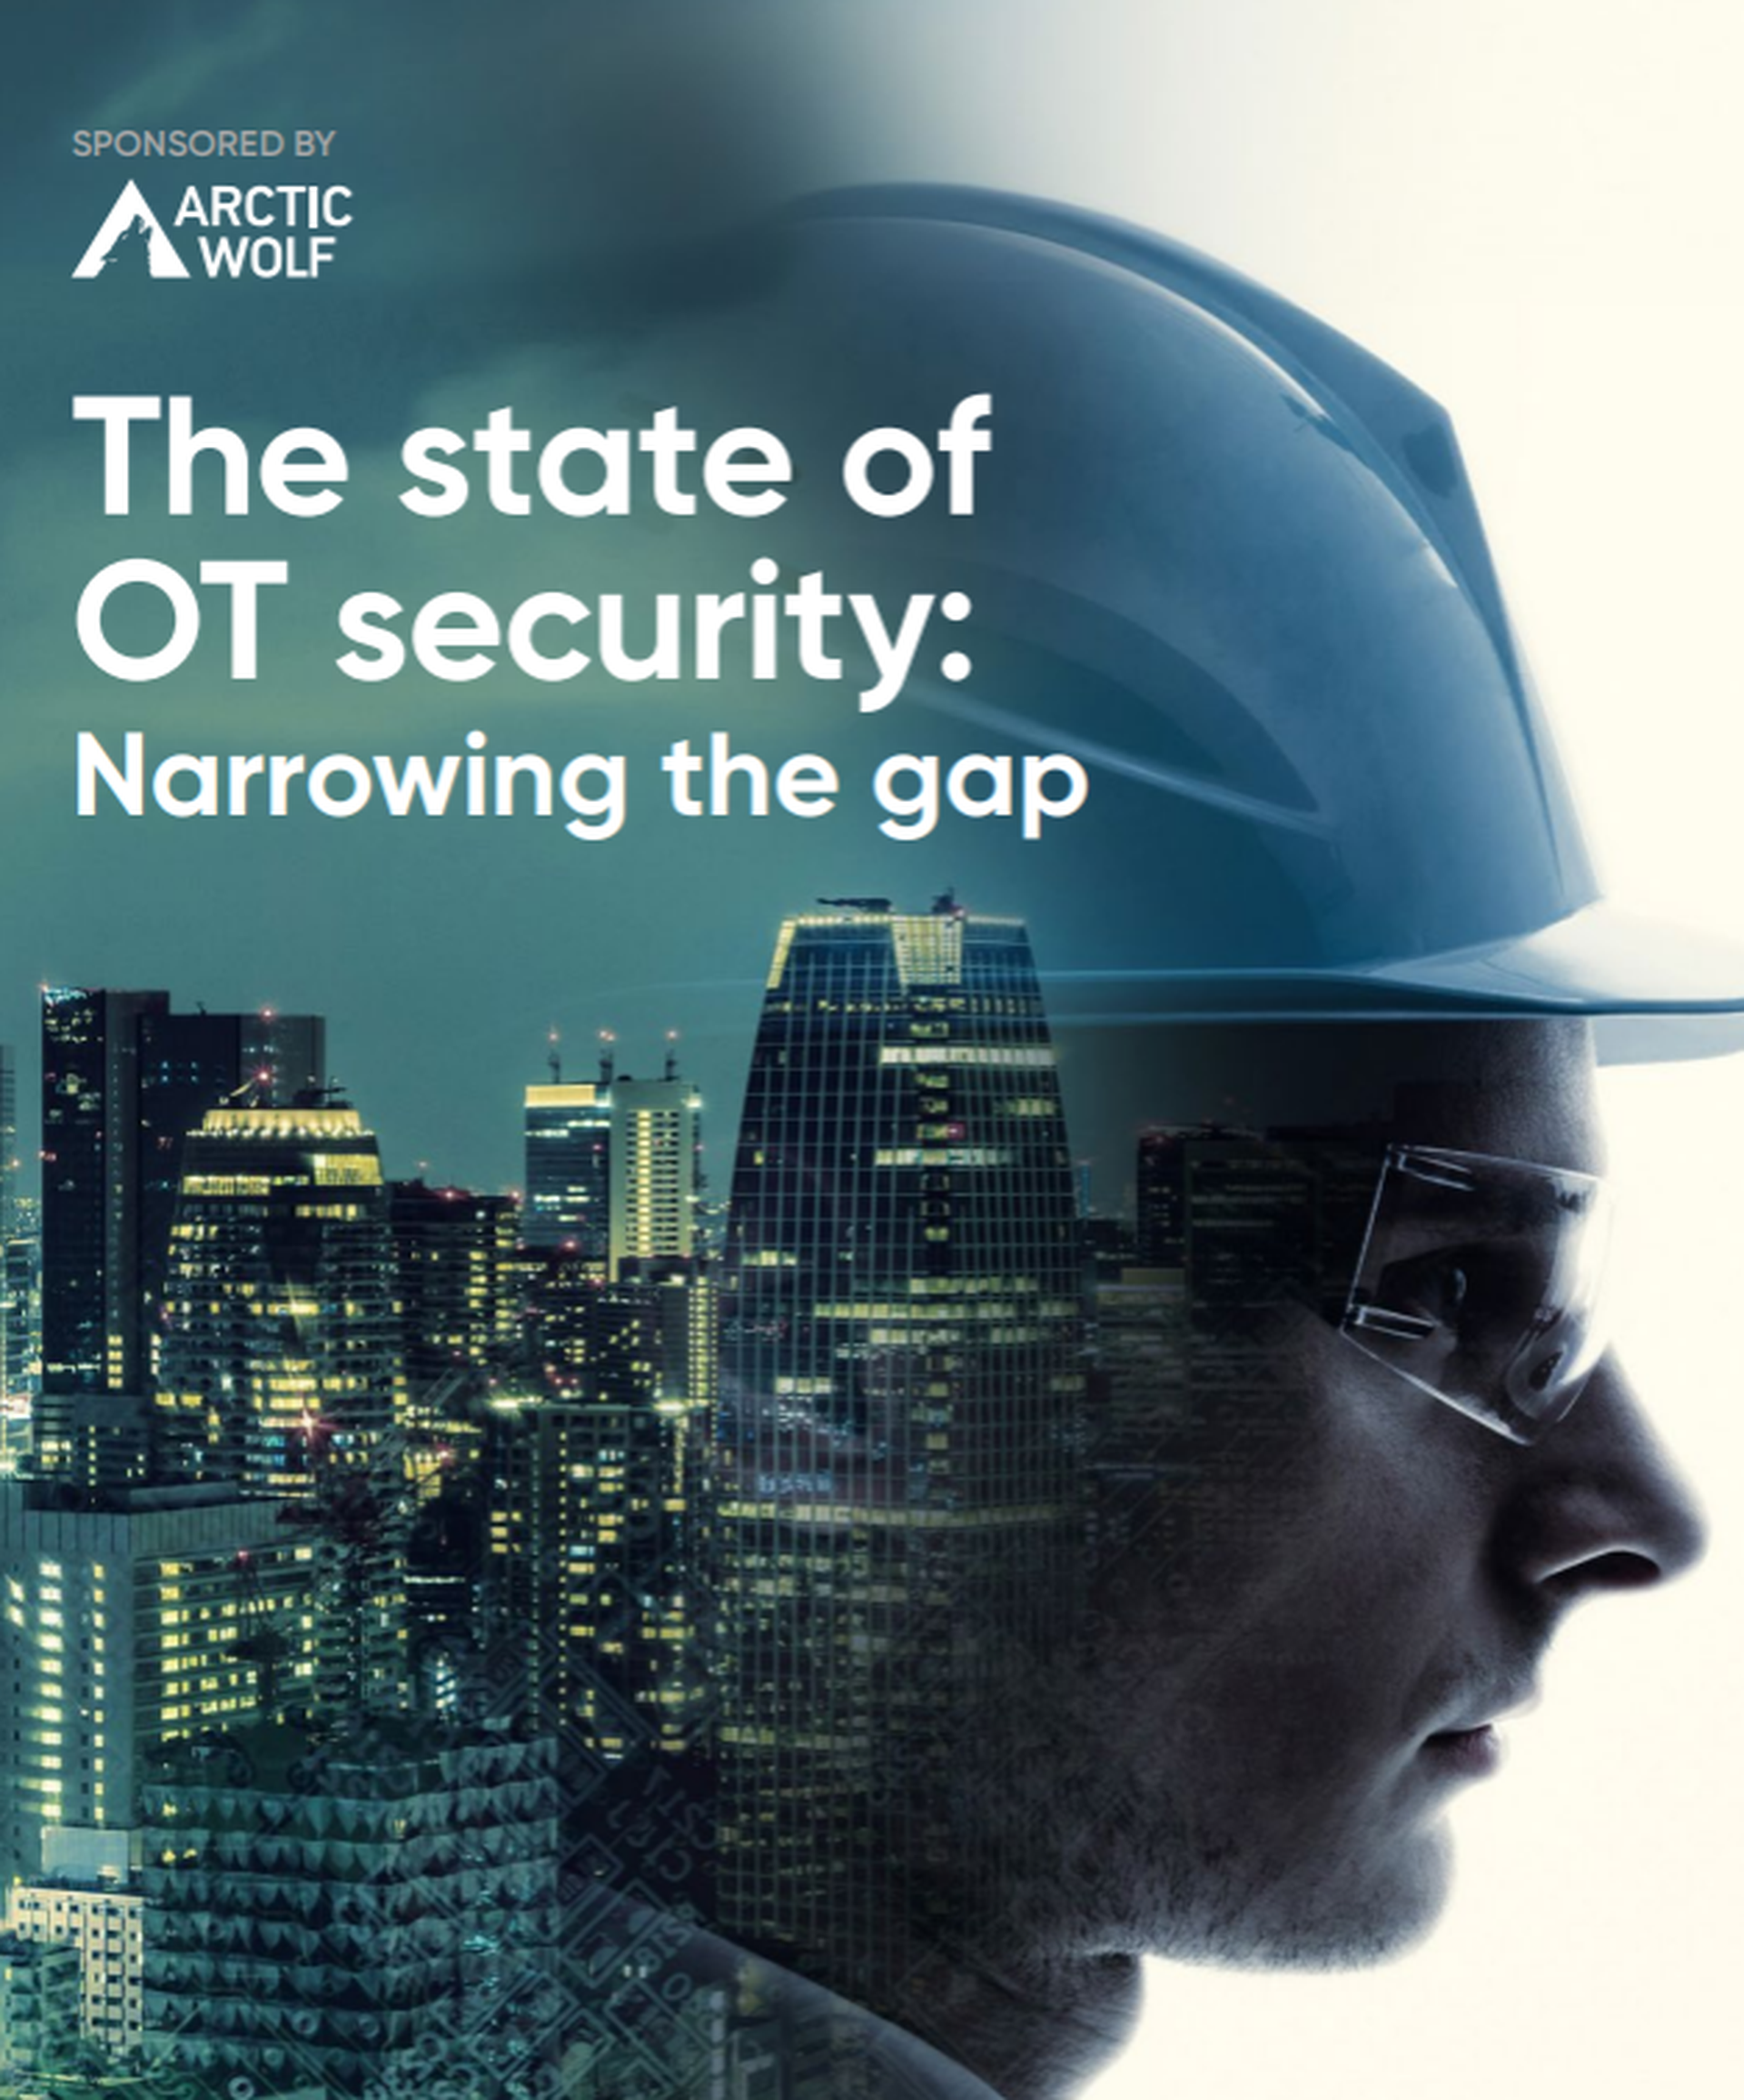 The state of OT security: Narrowing the gap